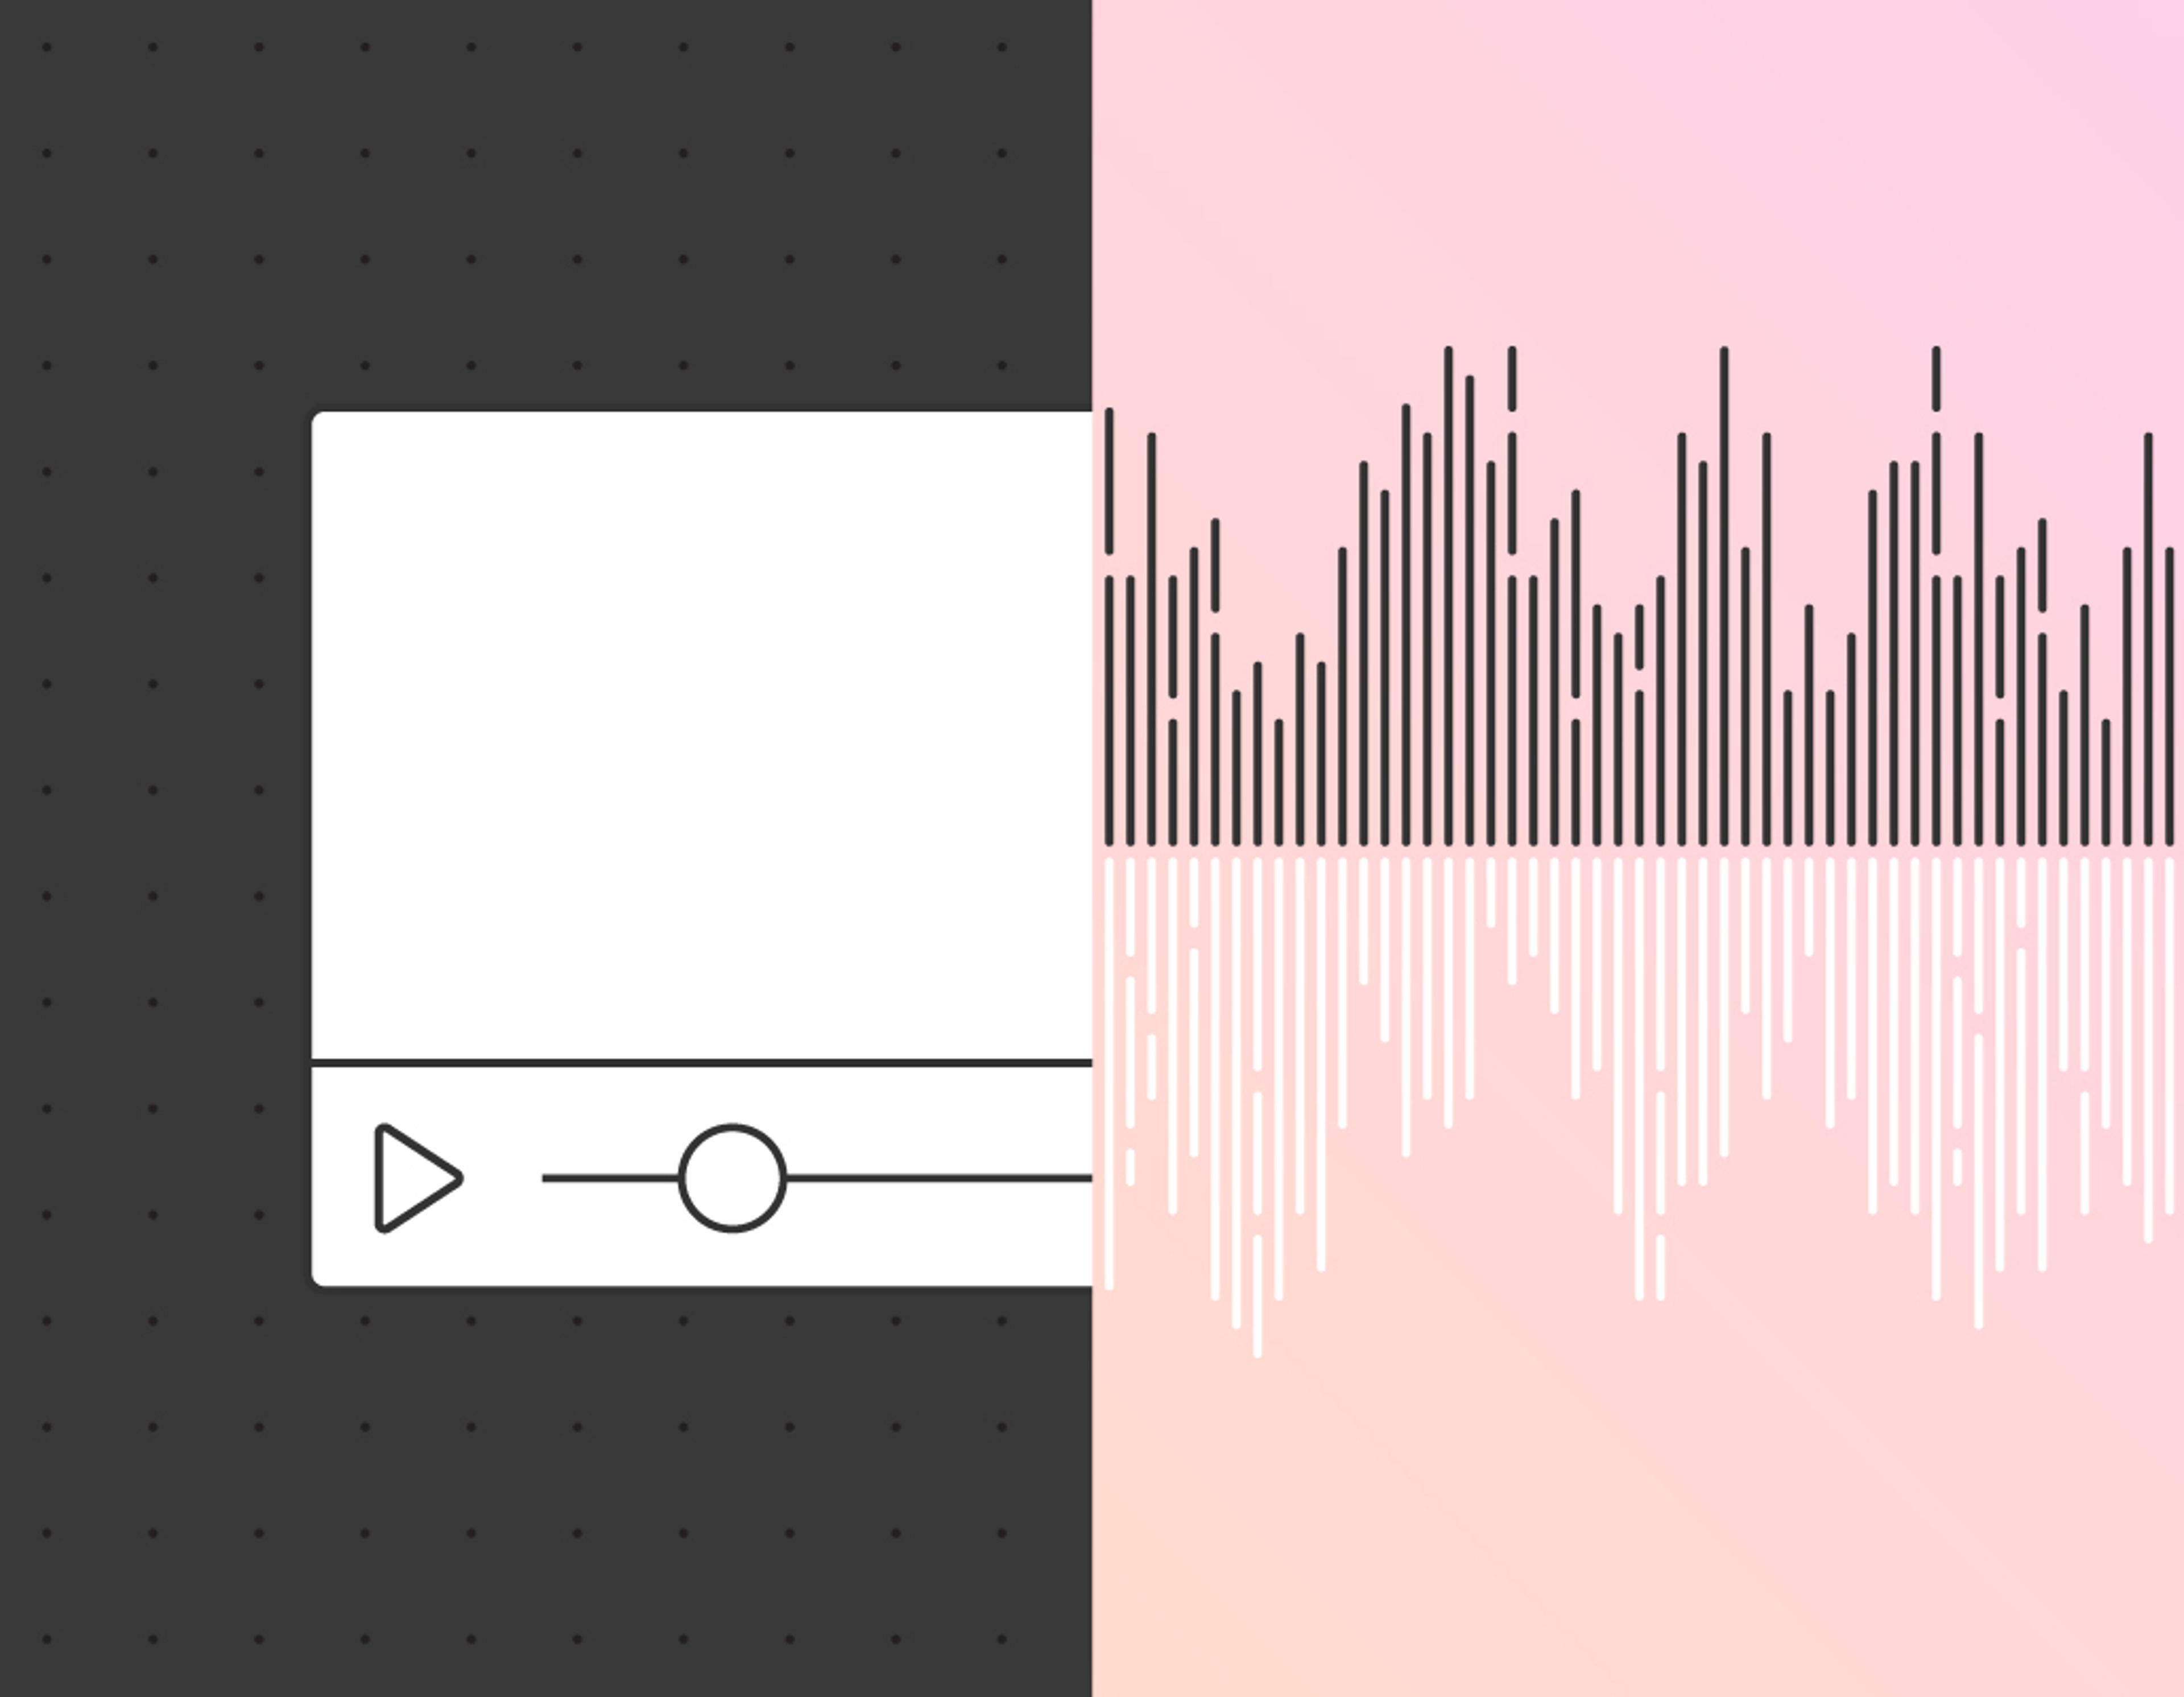 Video player and audio waveform